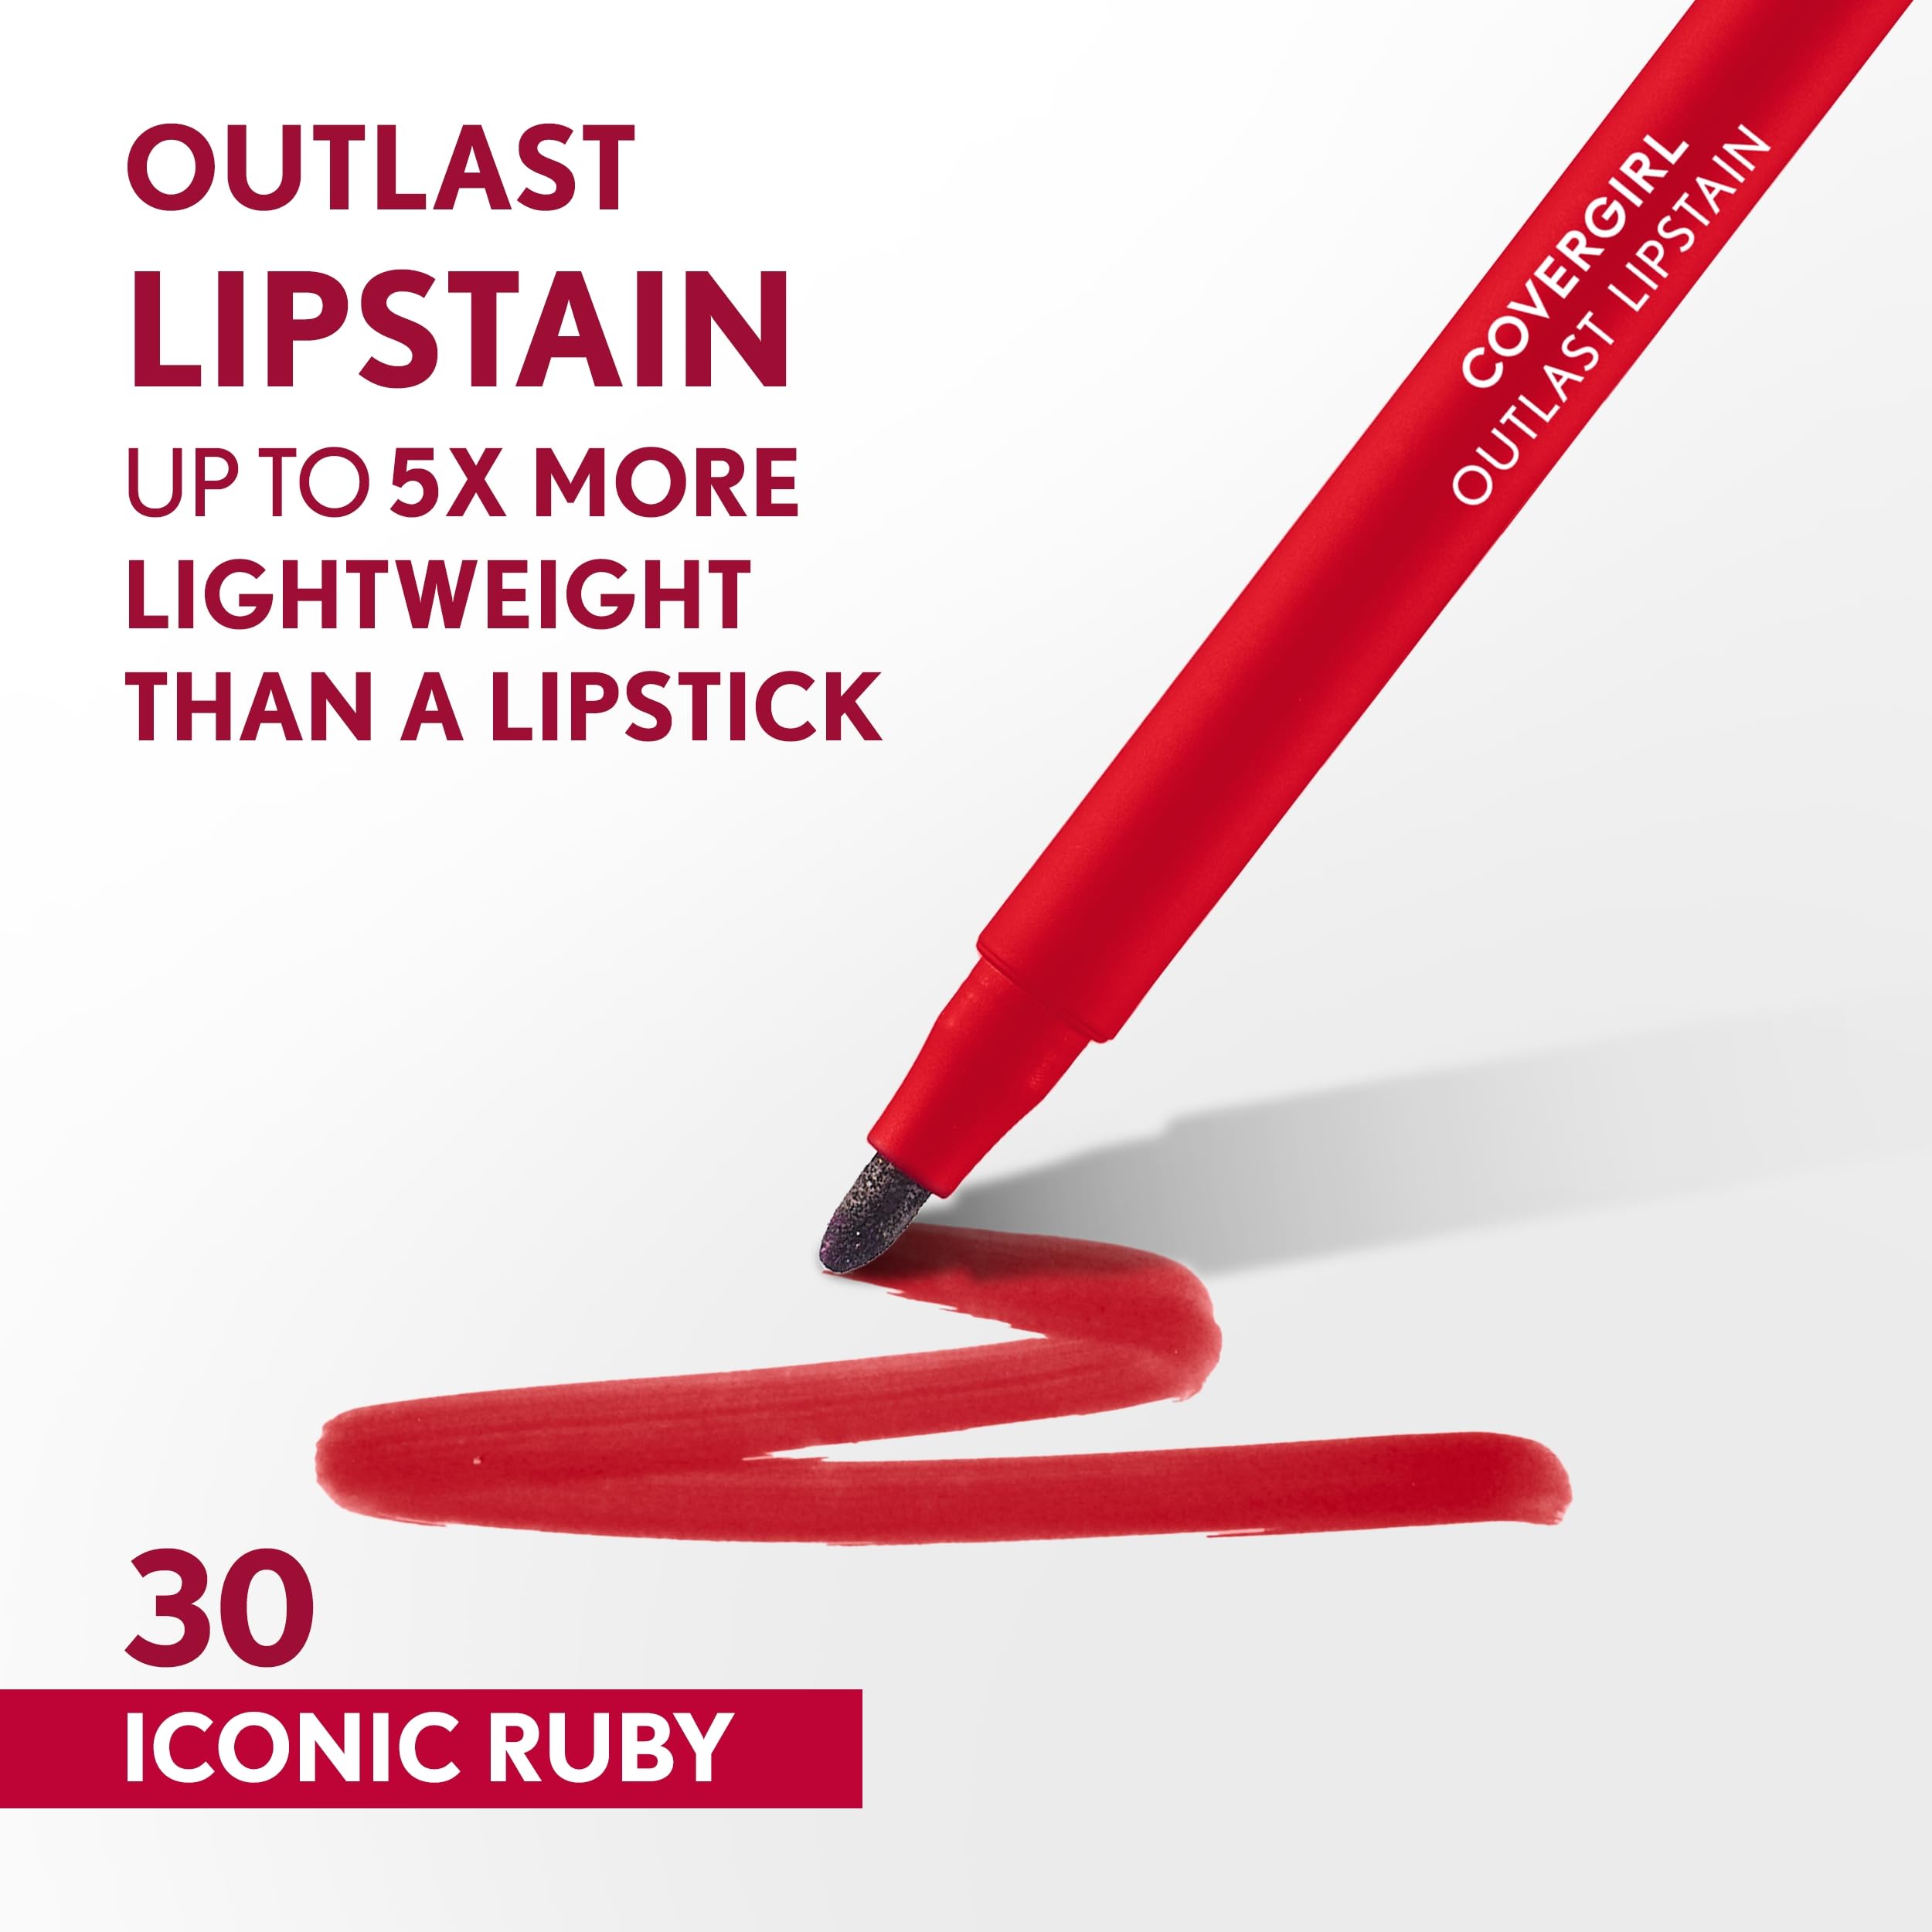 Covergirl Outlast, 30 Iconic Ruby, Lipstain, Smooth Application, Precise Pen-Like Tip, Transfer-Proof, Satin Stained Finish, Vegan Formula, 0.06oz